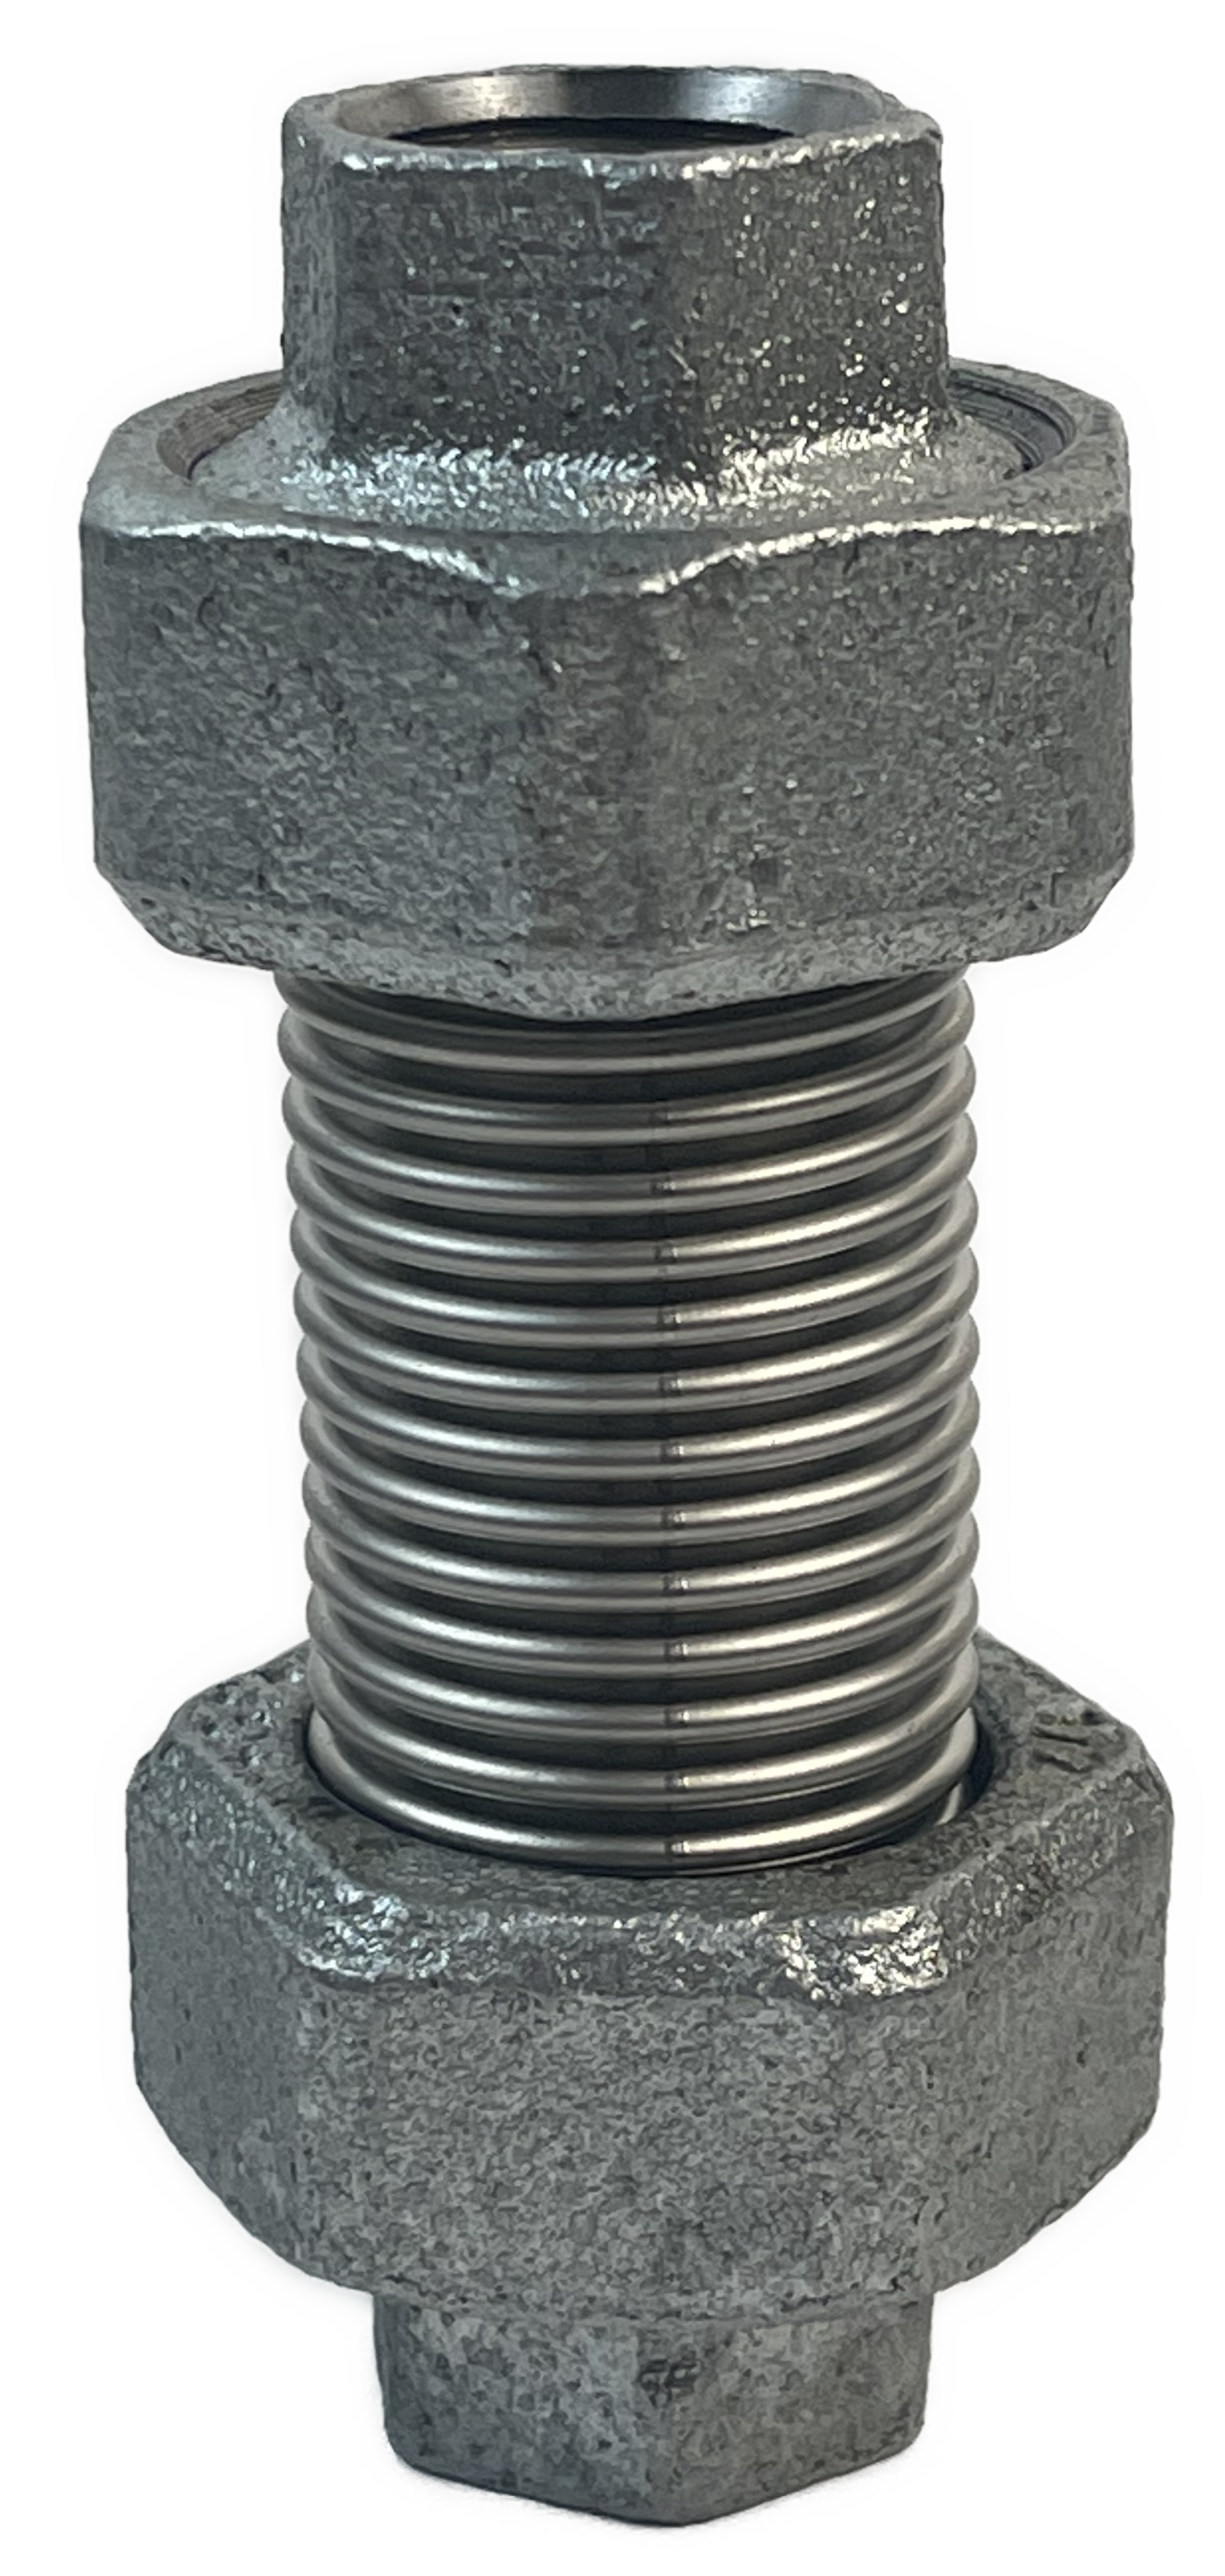 Axial steel expansion joint with threaded sockets made of malleable cast iron - Typ BOA 7160 00S-Ti